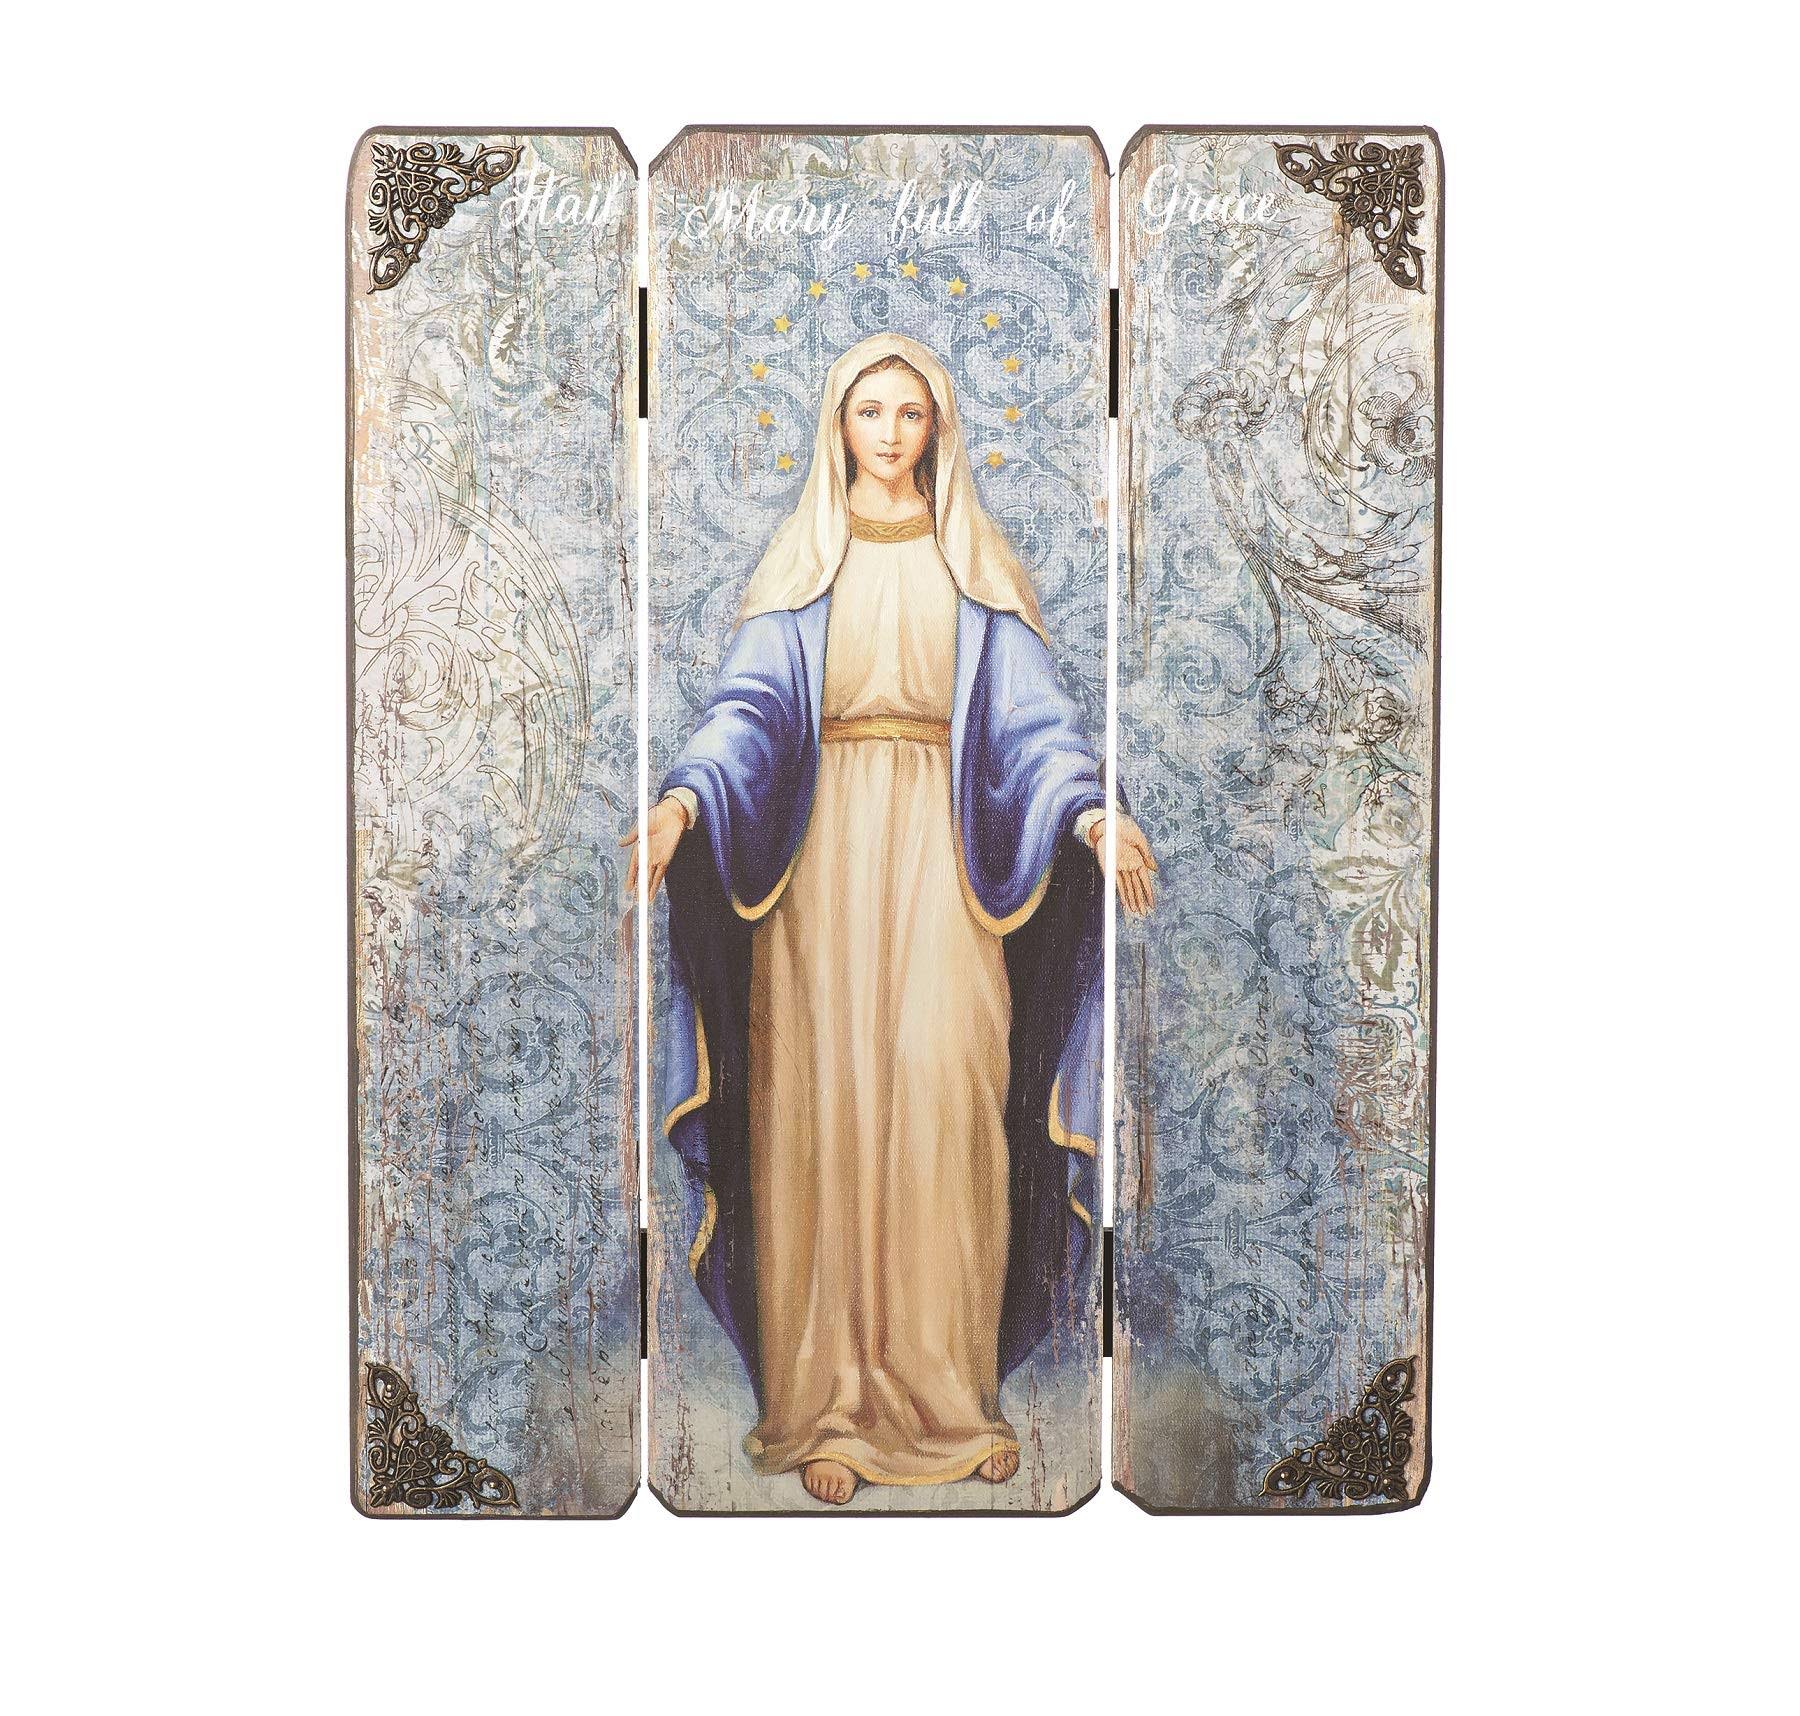 Our Lady of Grace Panel